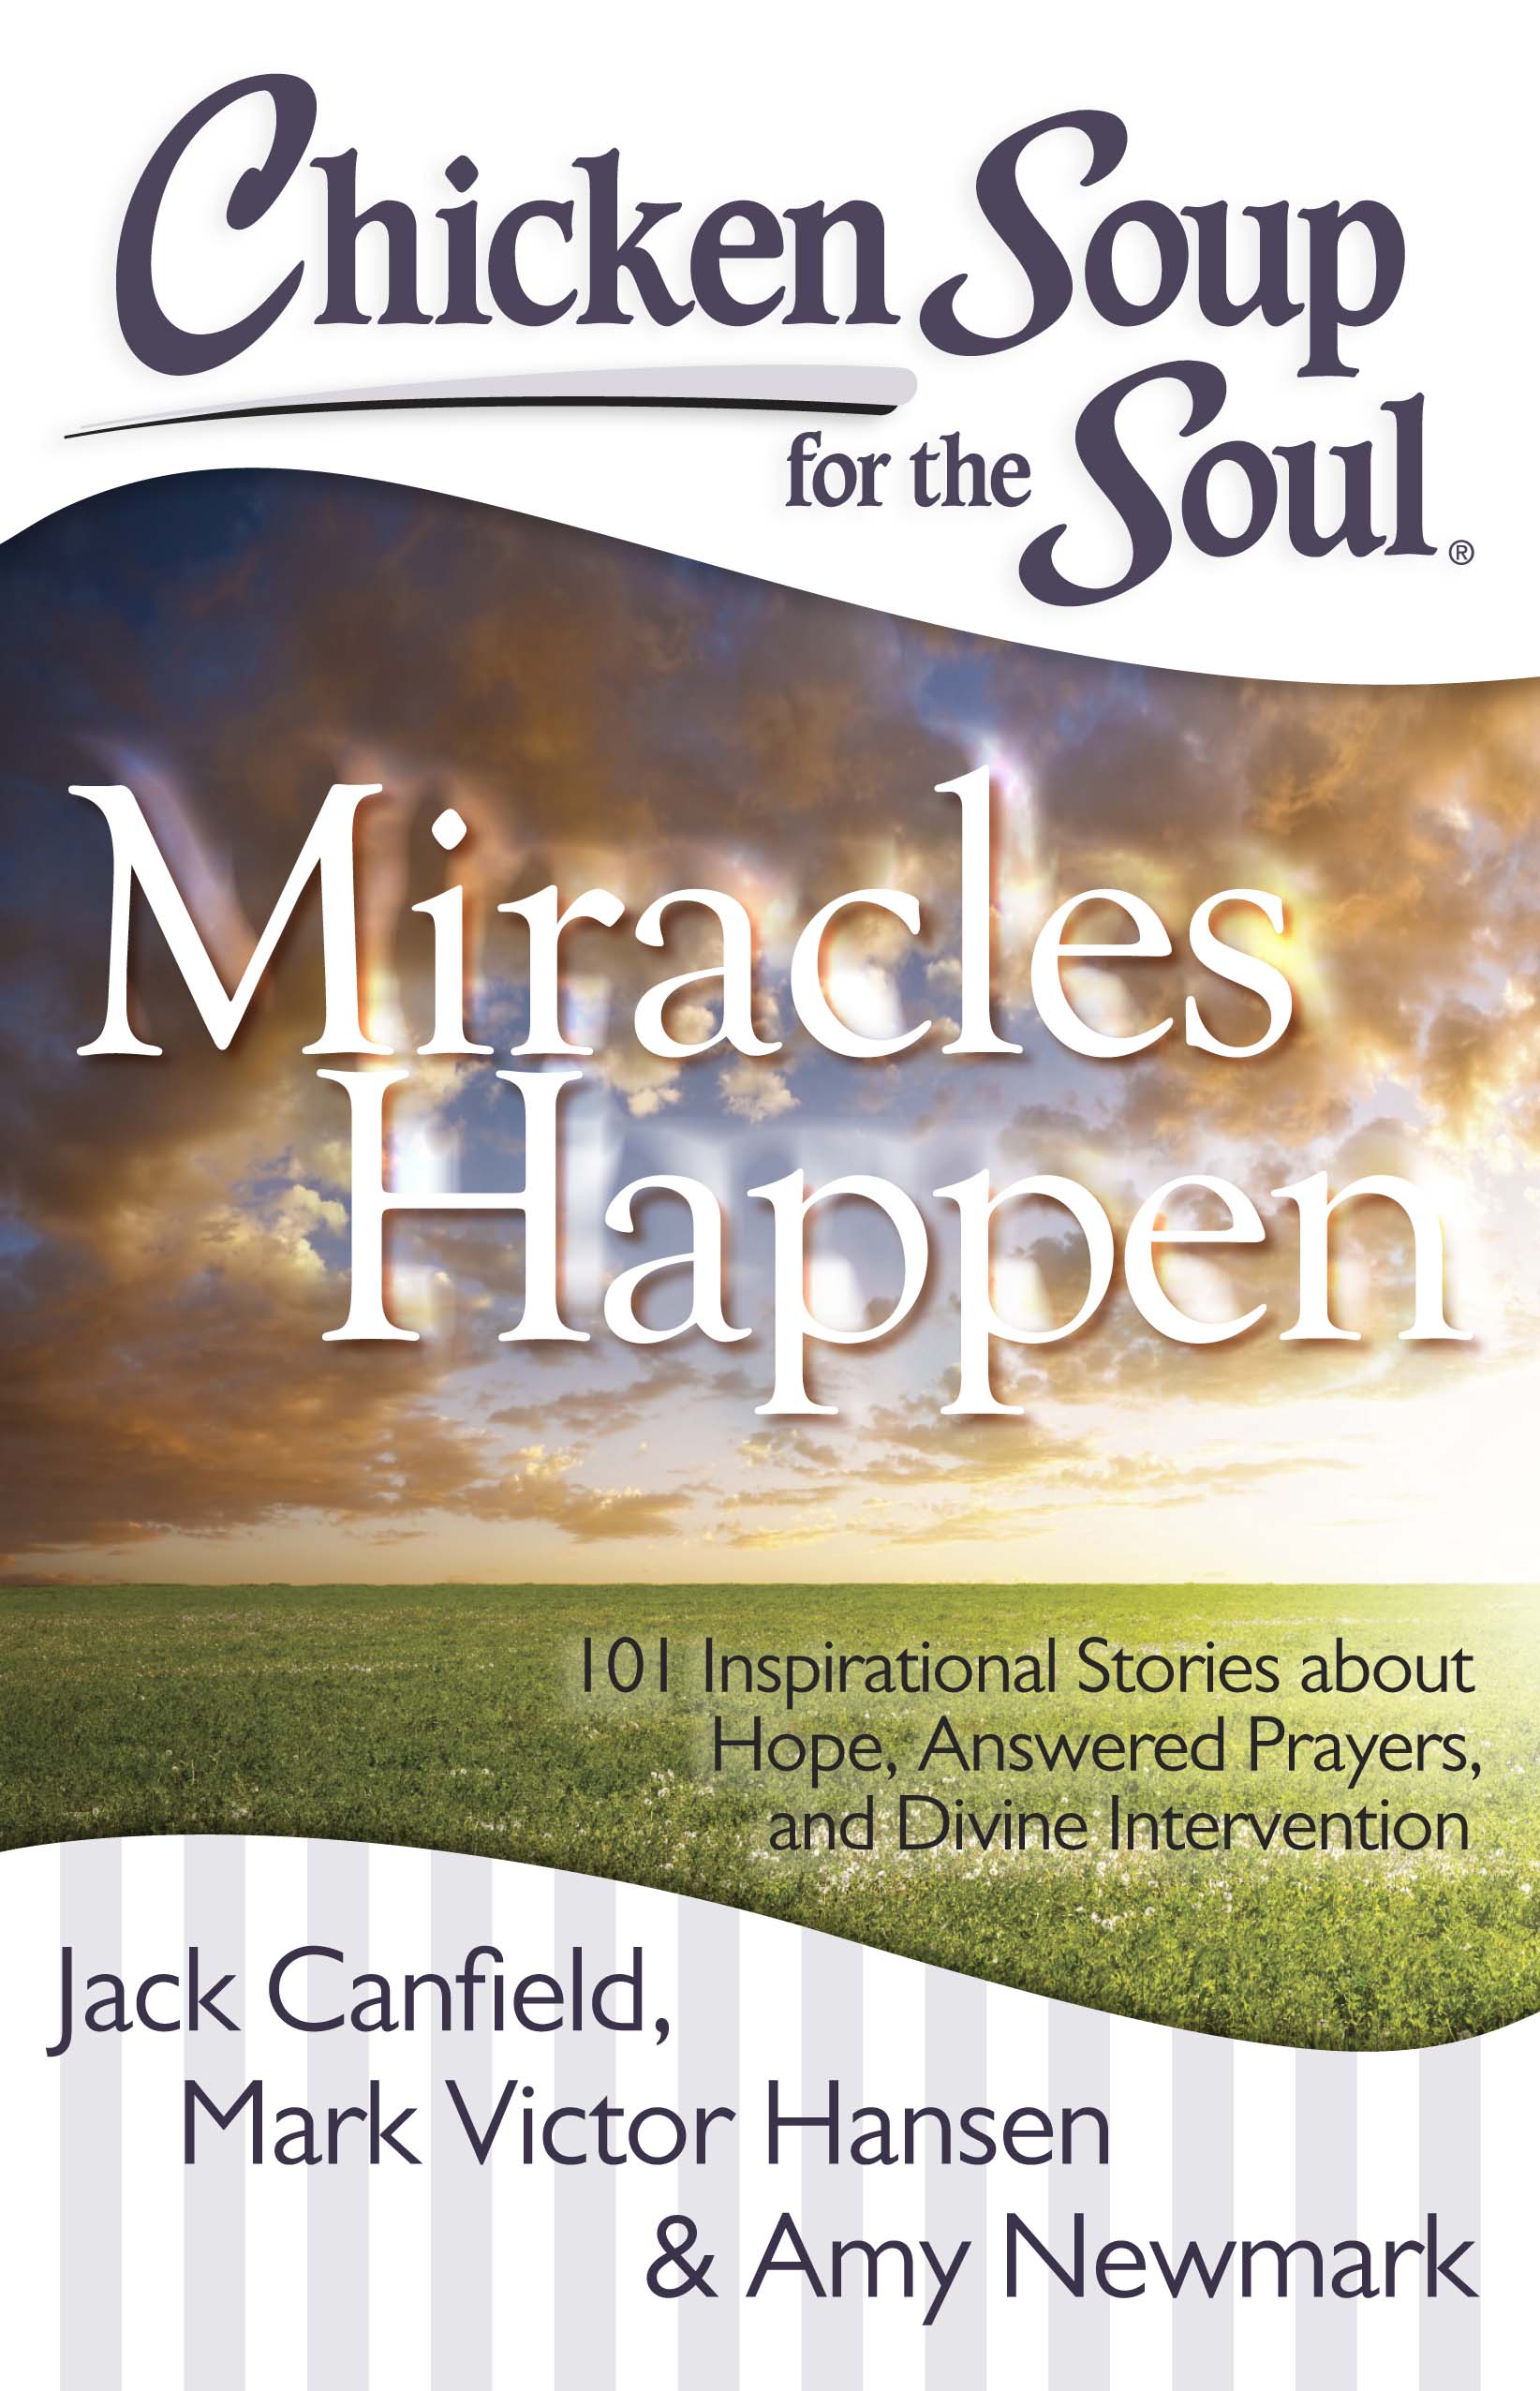 chicken soup for the soul free readings